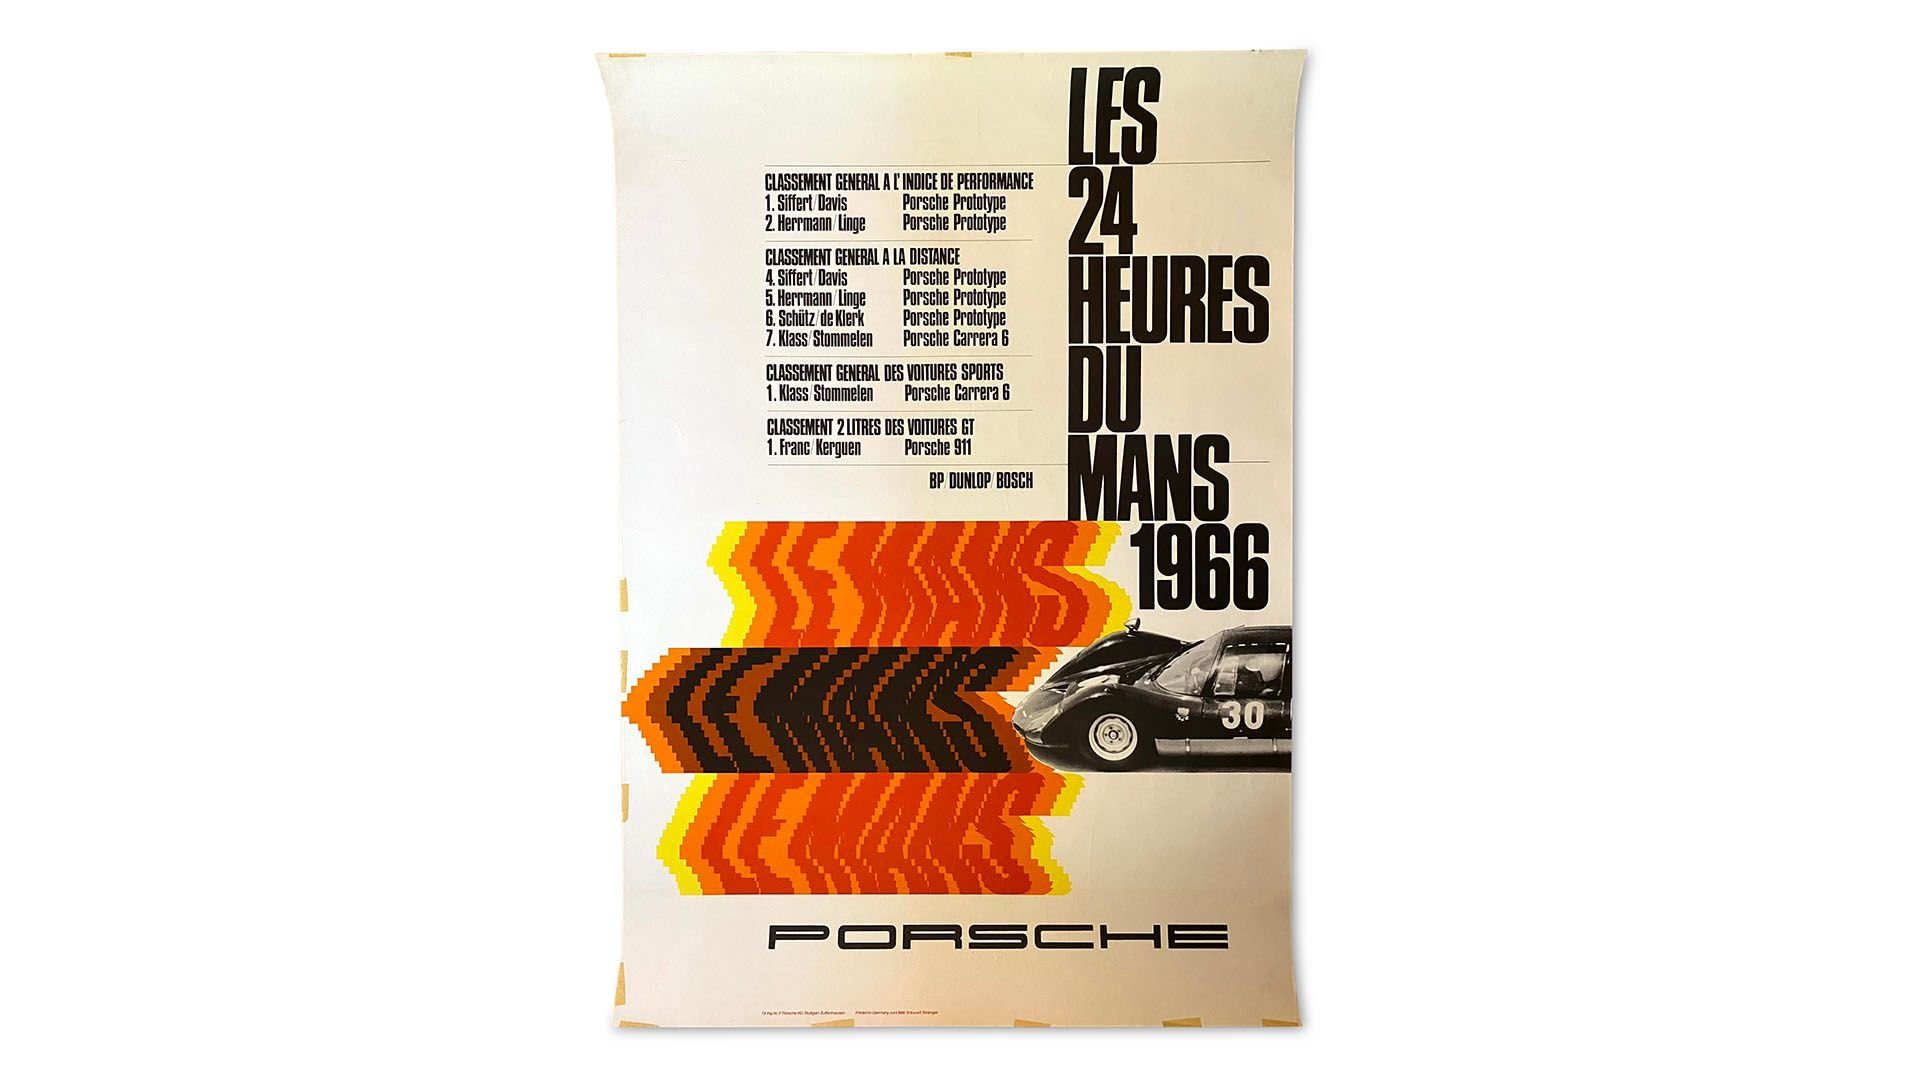 For Sale Group of 5 Porsche Sports Racing Prototype (904, 906, 910 Bergspyder) Factory Racing Posters 1965-1967